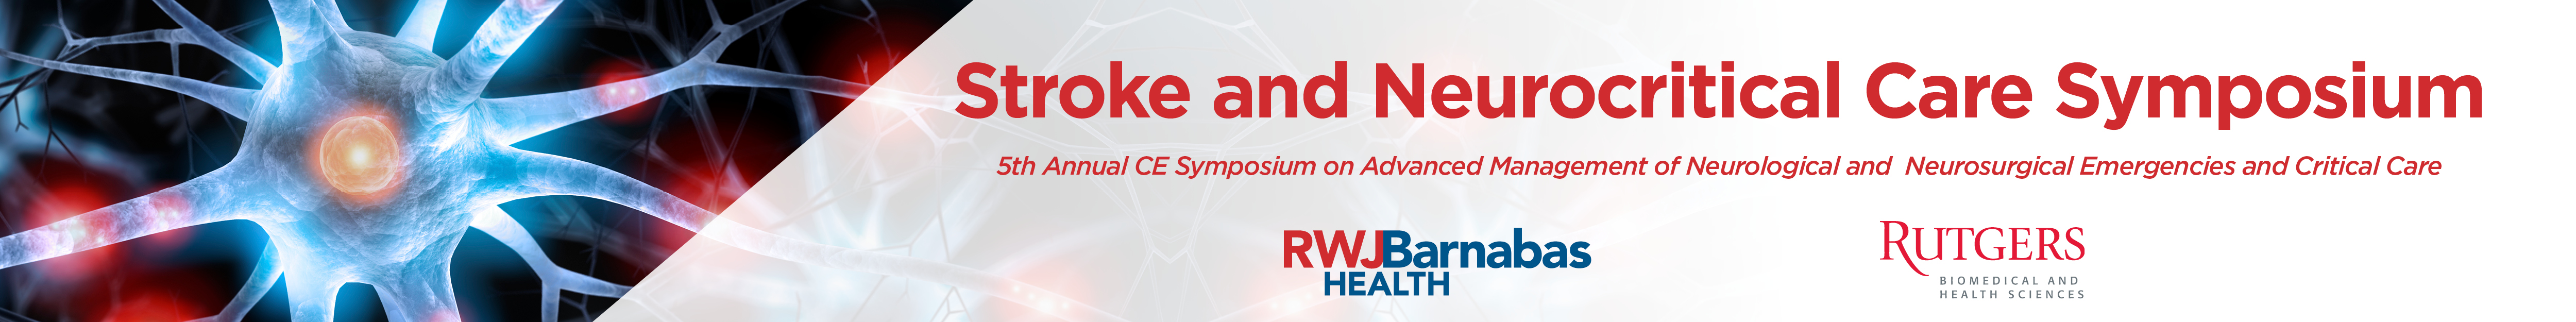 5th Annual Stroke and Neurocritical Care Symposium: Advanced Management of Neurological and Neurosurgical Emergencies and Critical Care Banner